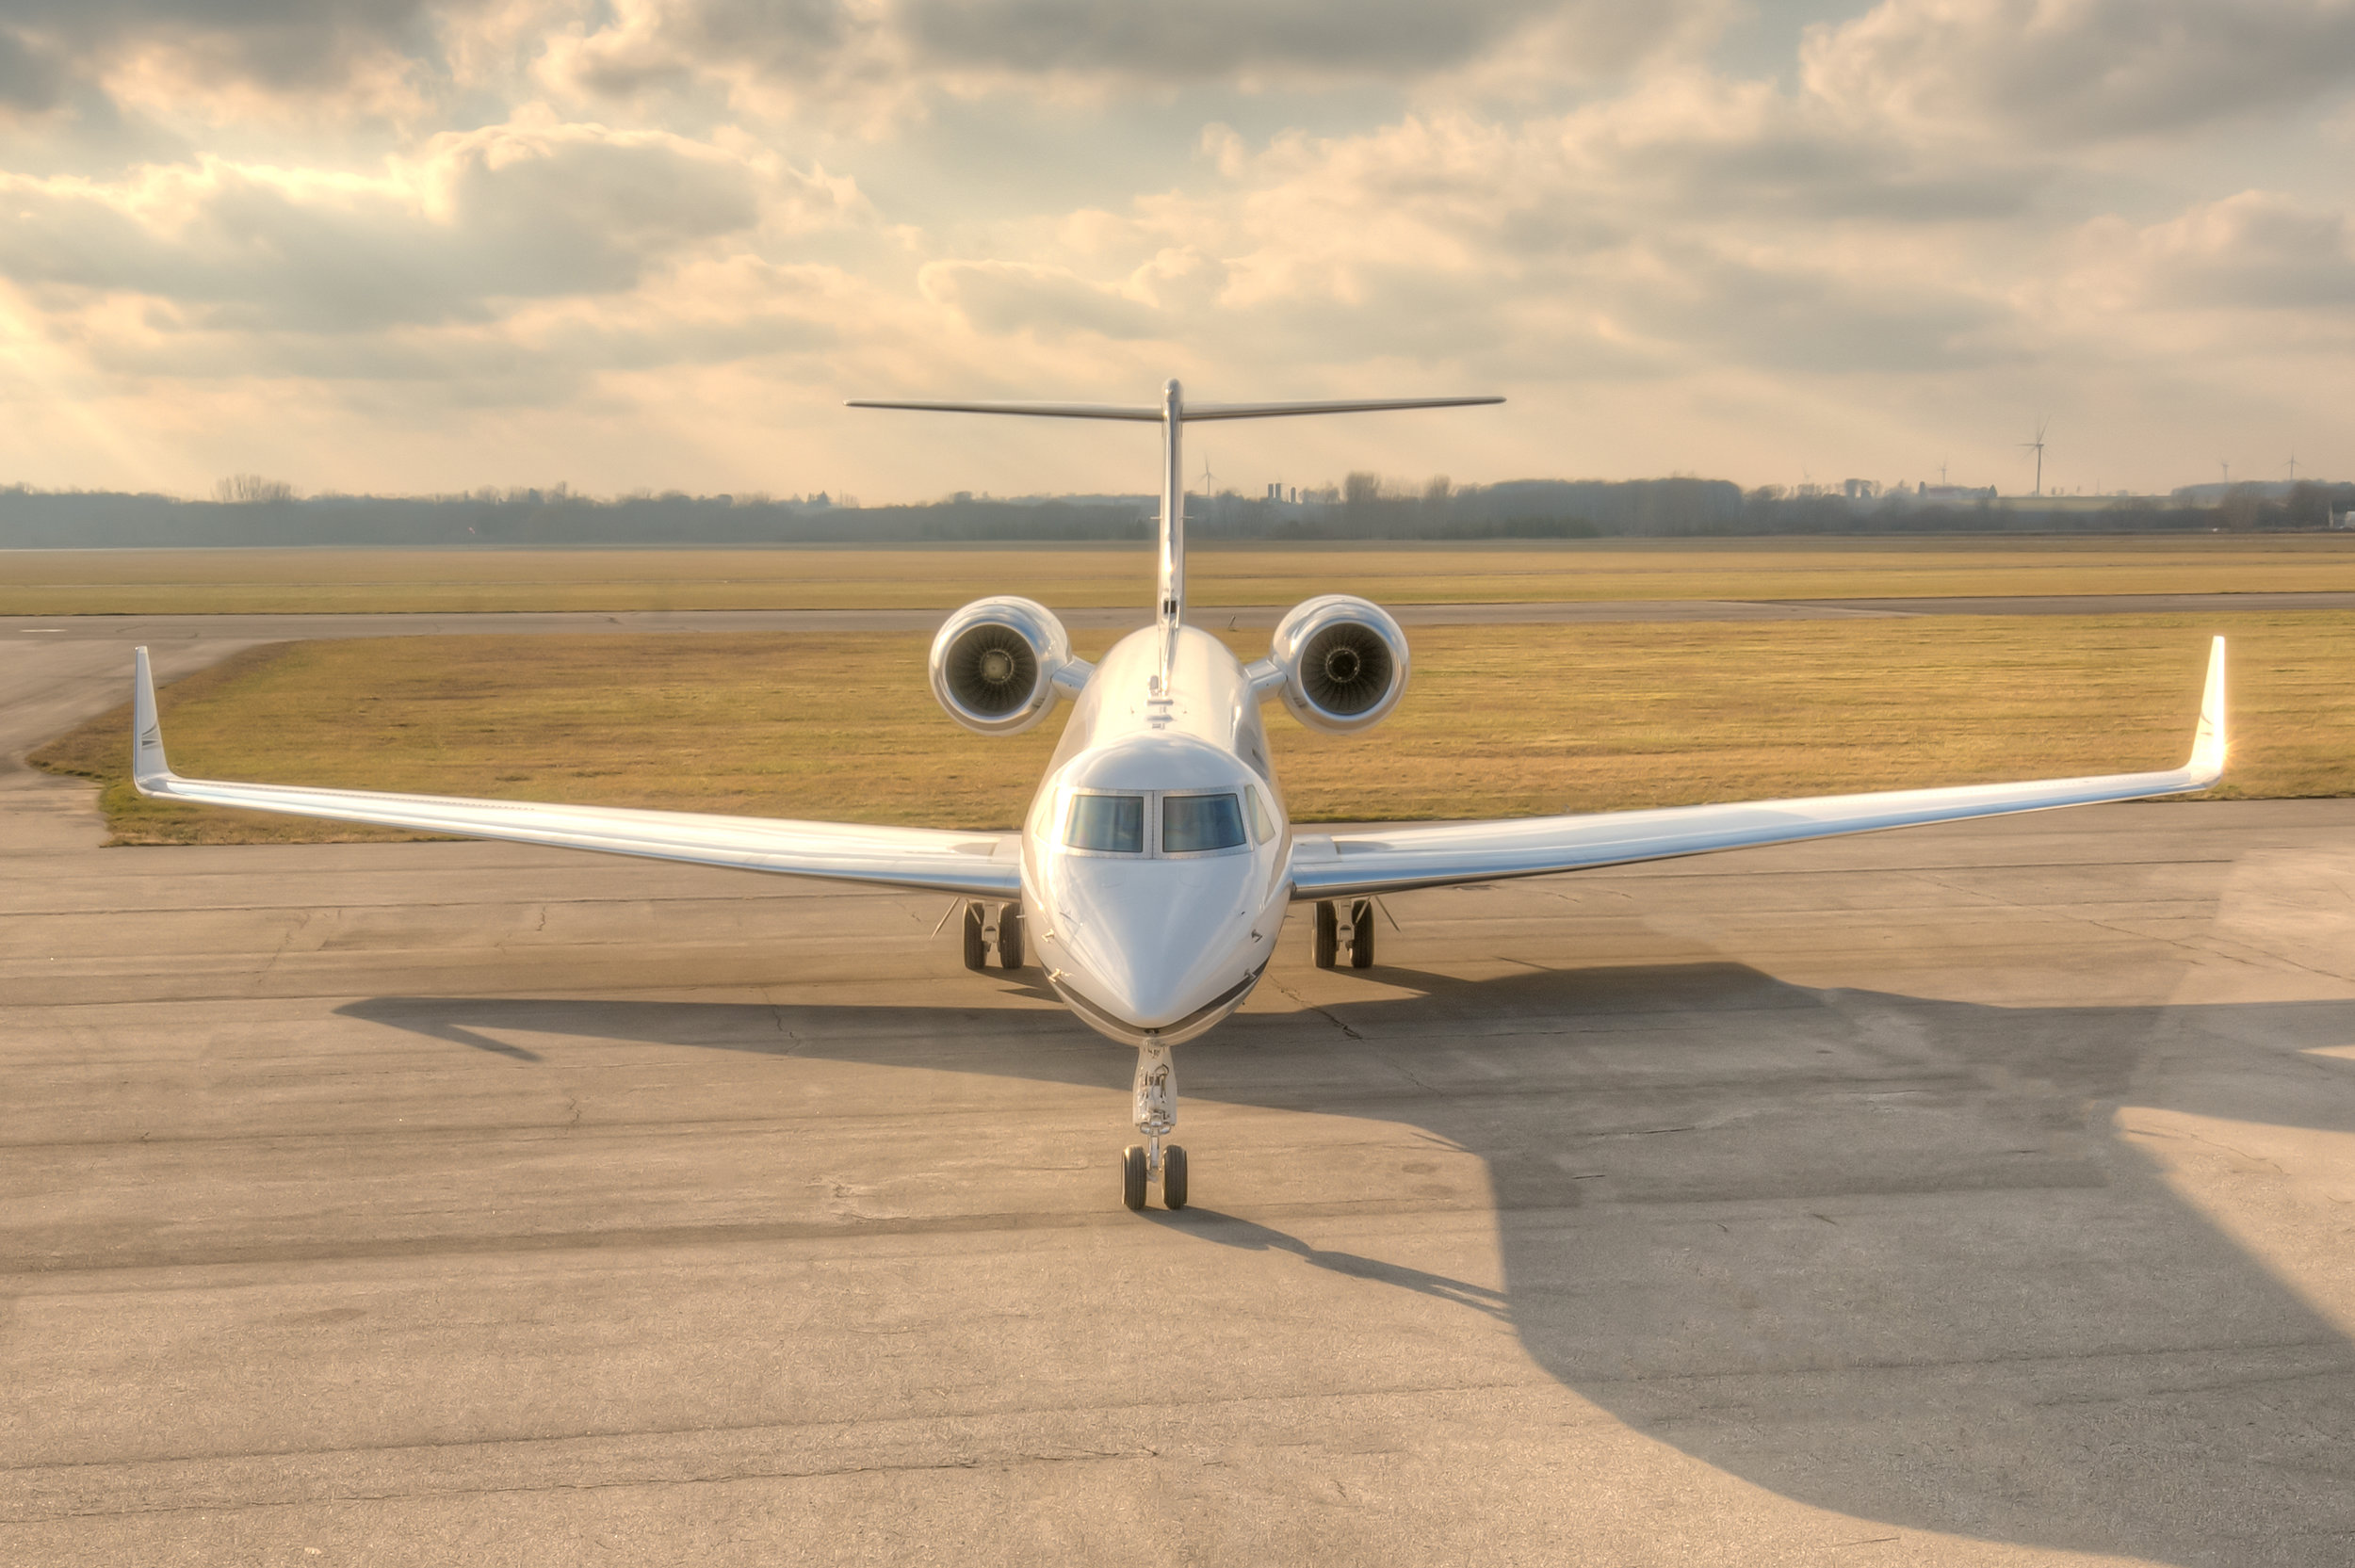 Gulfstream V, SN 552 For Sale or Lease